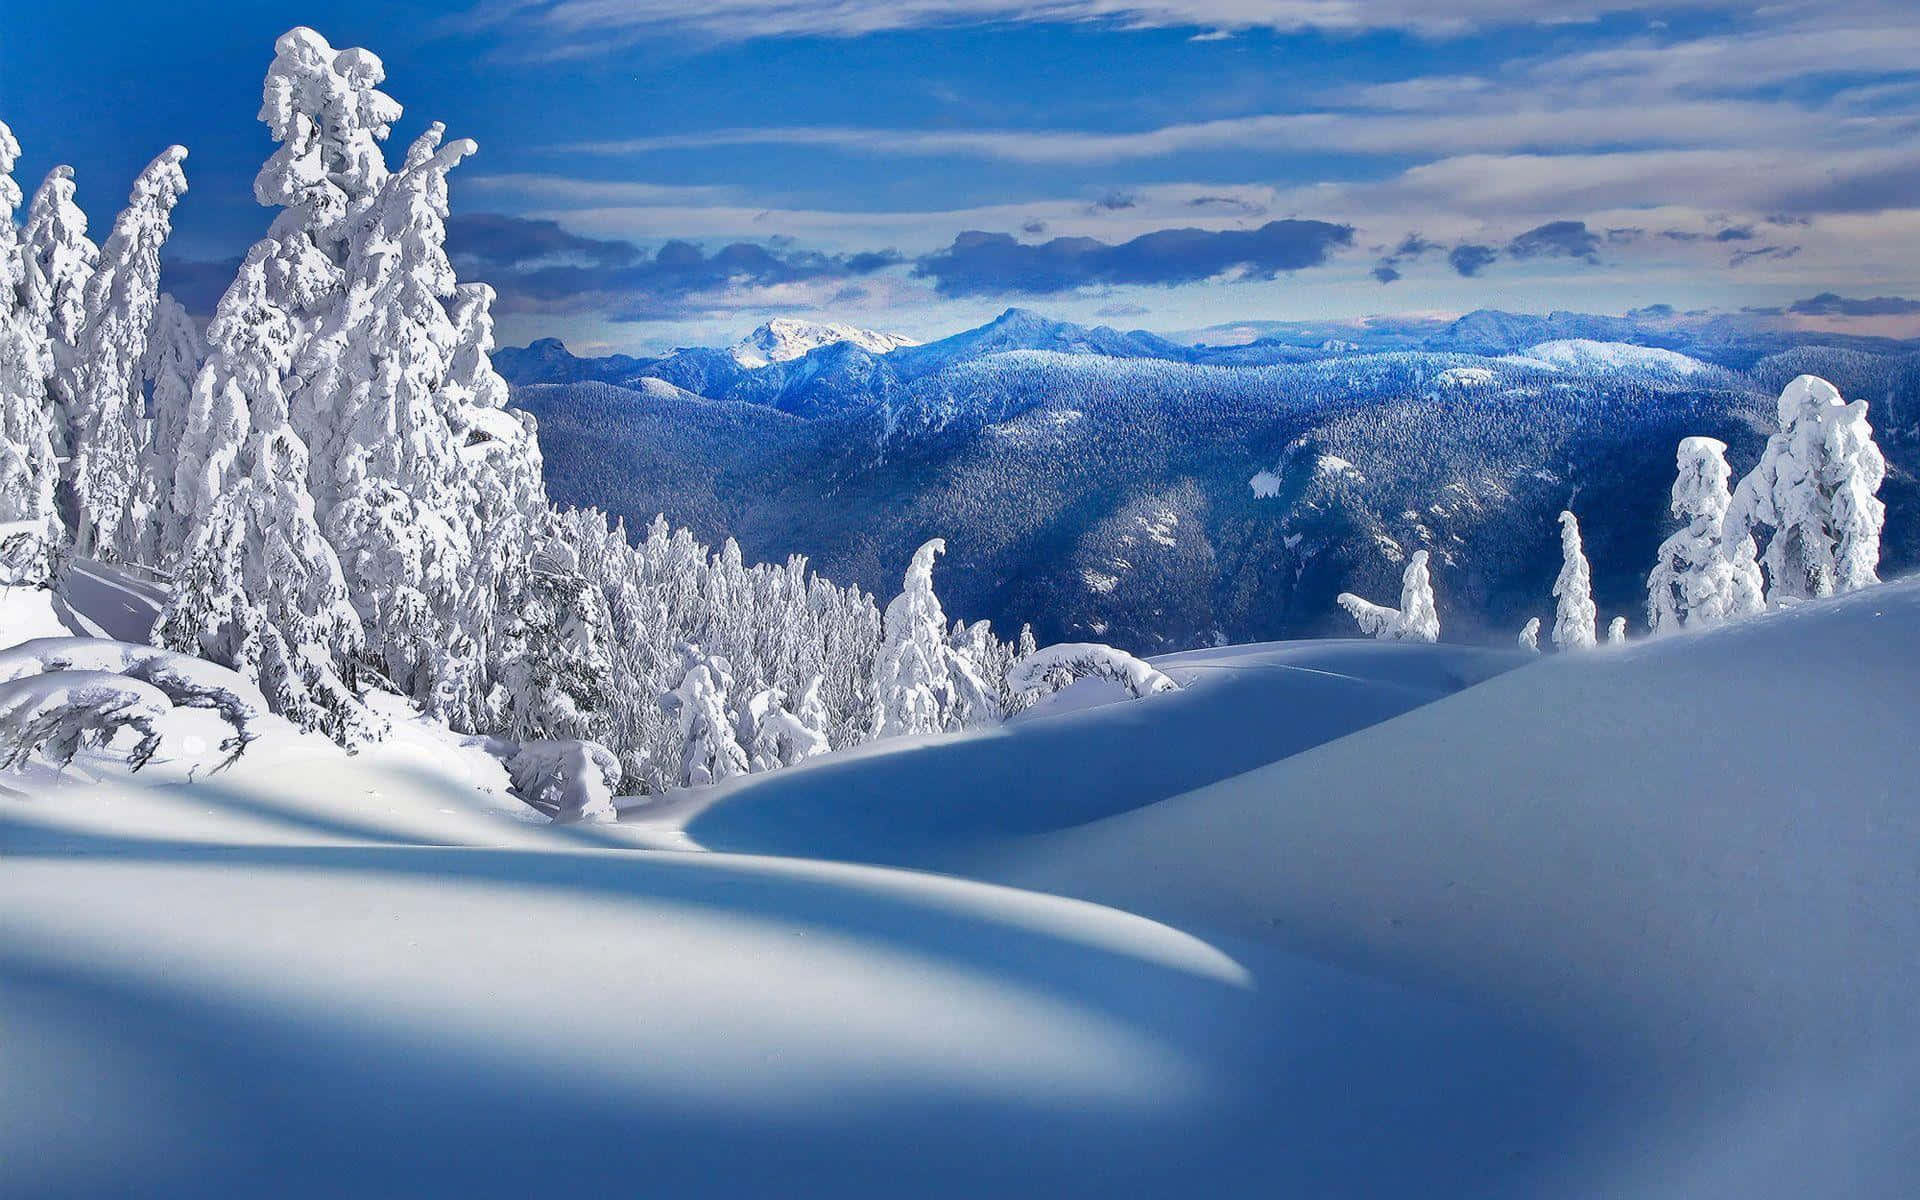 Exploring the beauty of winter in the picturesque Snowy Mountains